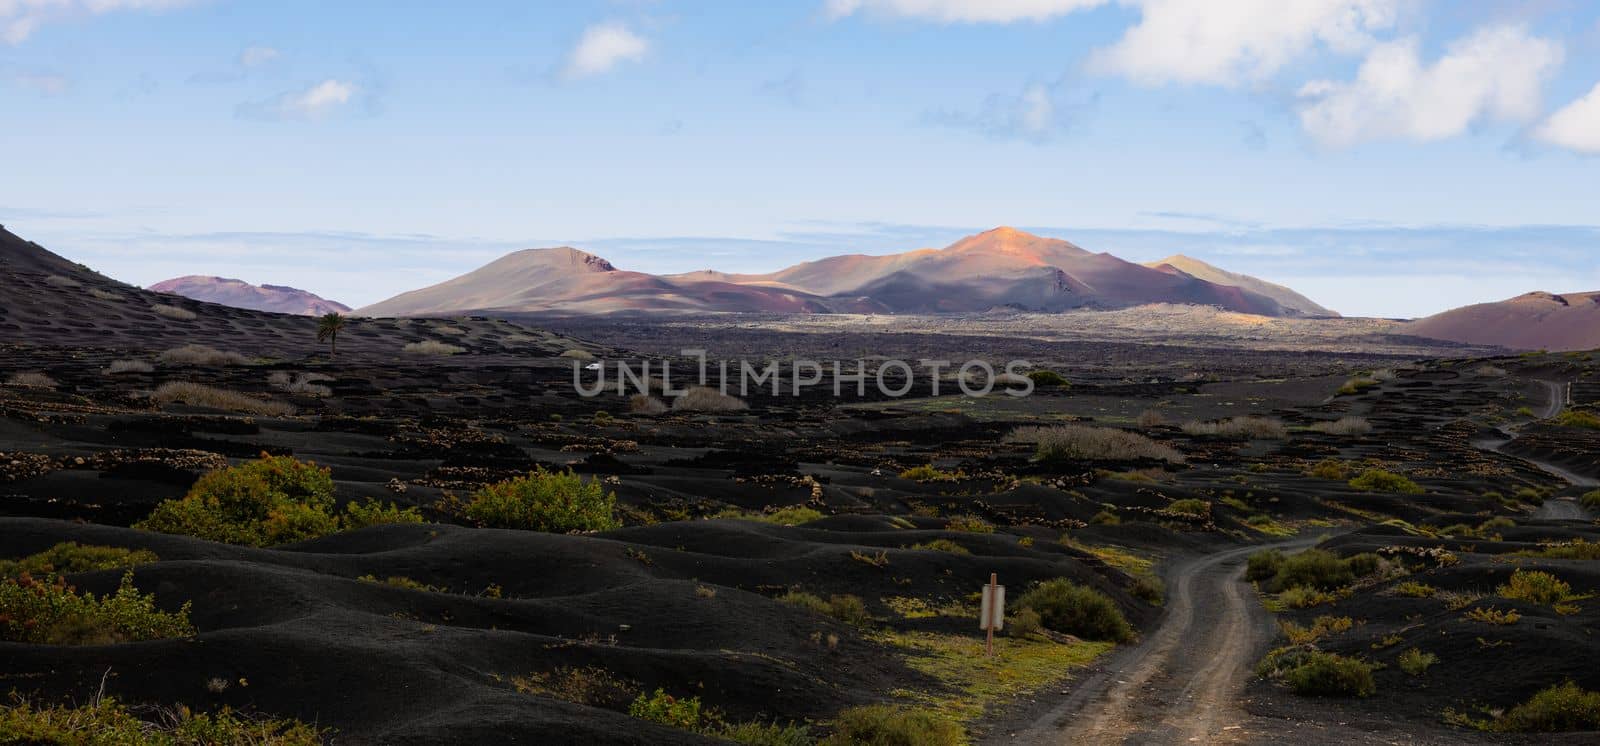 Black volcanic landscape of La Geria wine growing region with view of Timanfaya National Park in Lanzarote. Popular touristic attraction in Lanzarote island, Canary Islands, Spain